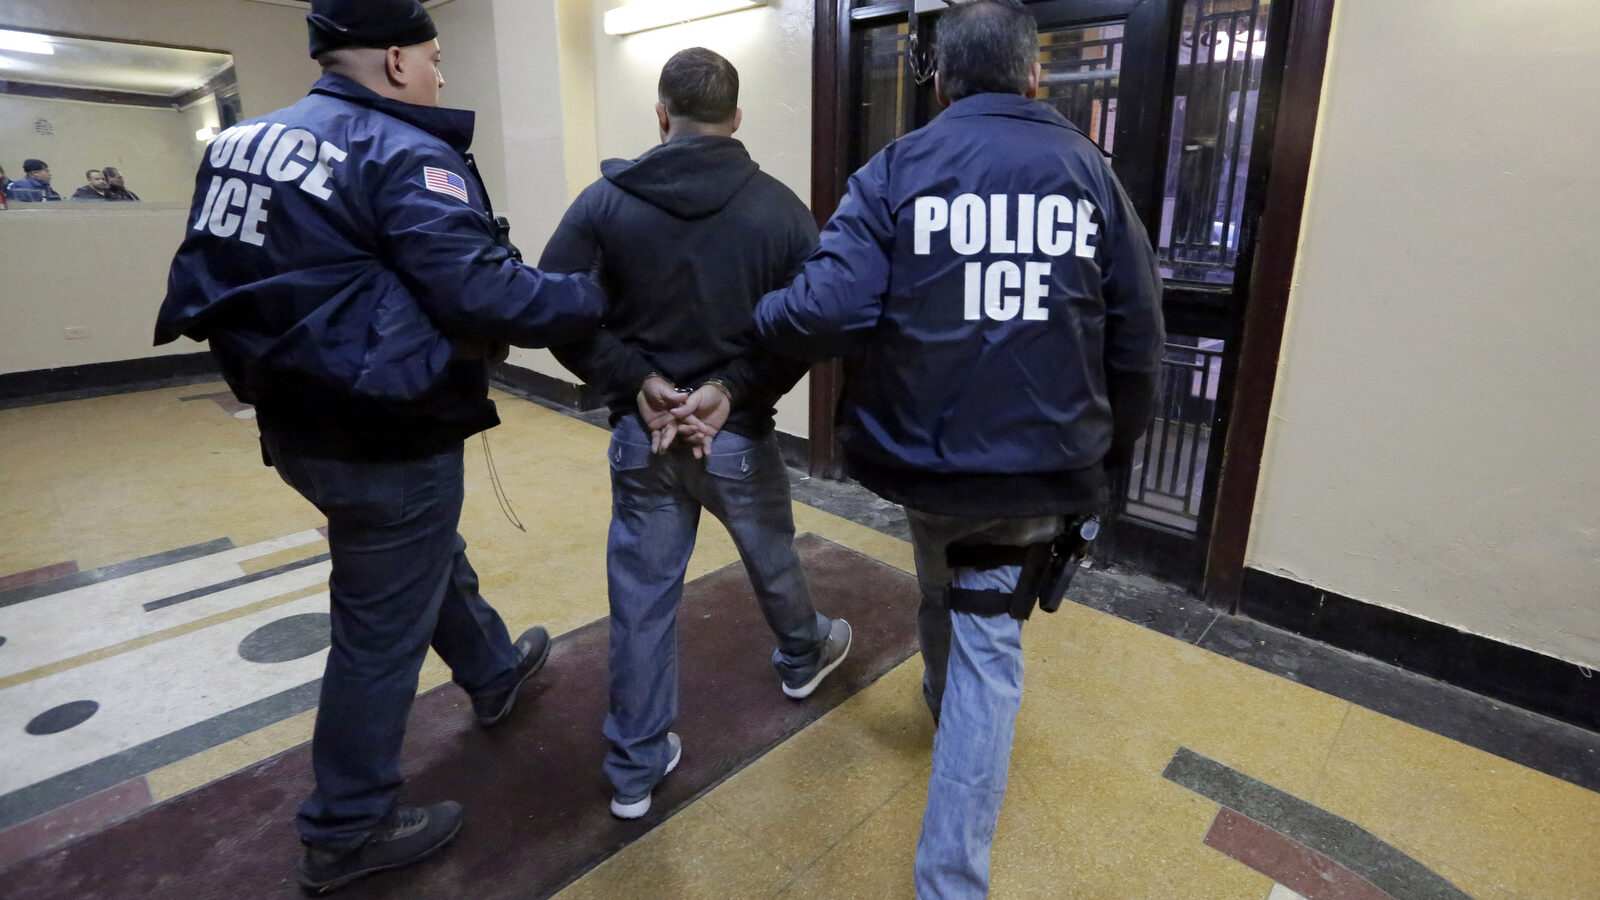 Immigration and Customs Enforcement officers escort an arrestee in an apartment building, in the Bronx borough of New York, during a series of early-morning raids. (AP/Richard Drew, File)